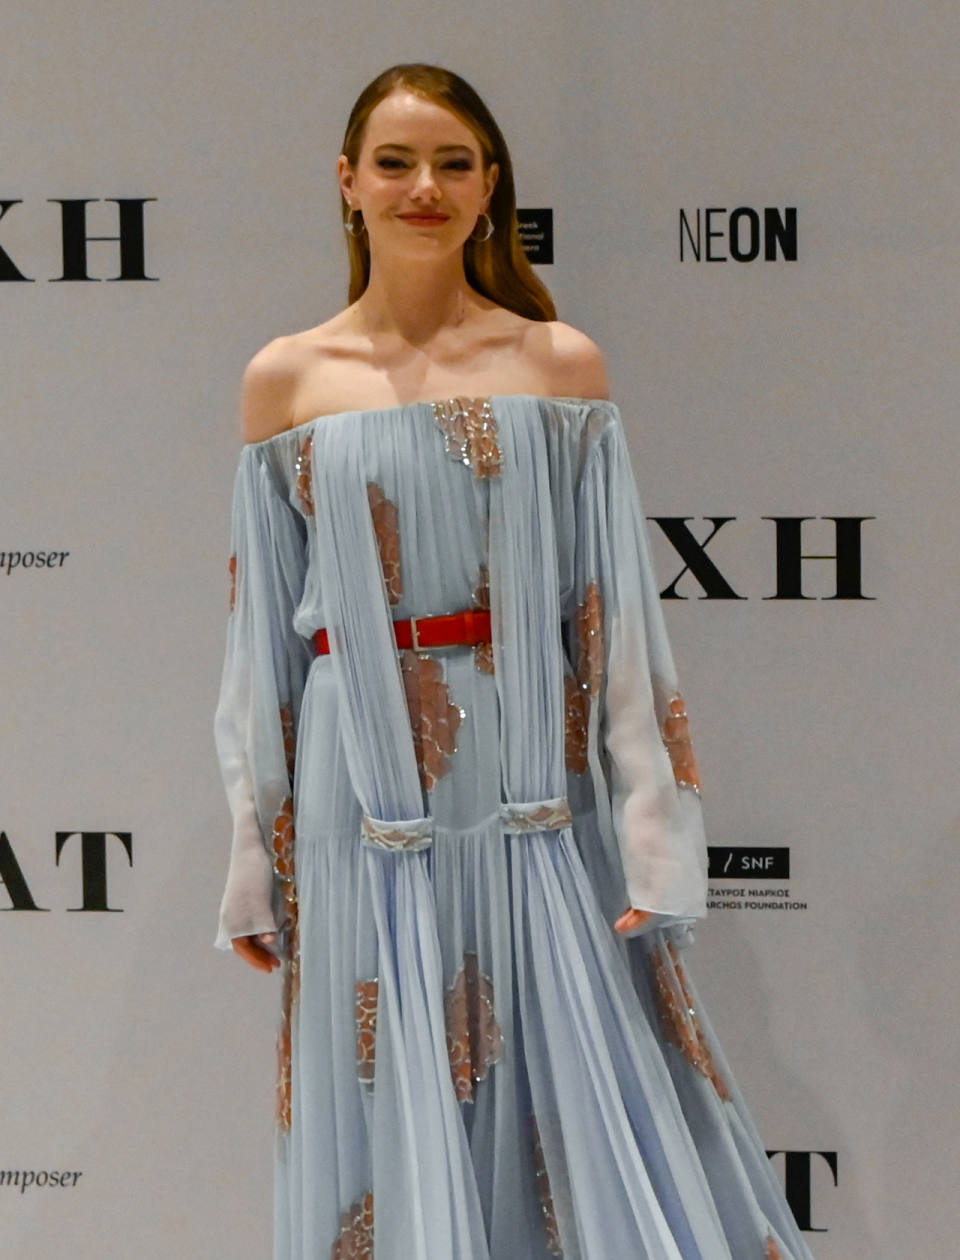 Emma Stone attends the premiere for Bleat in Athens, Greese